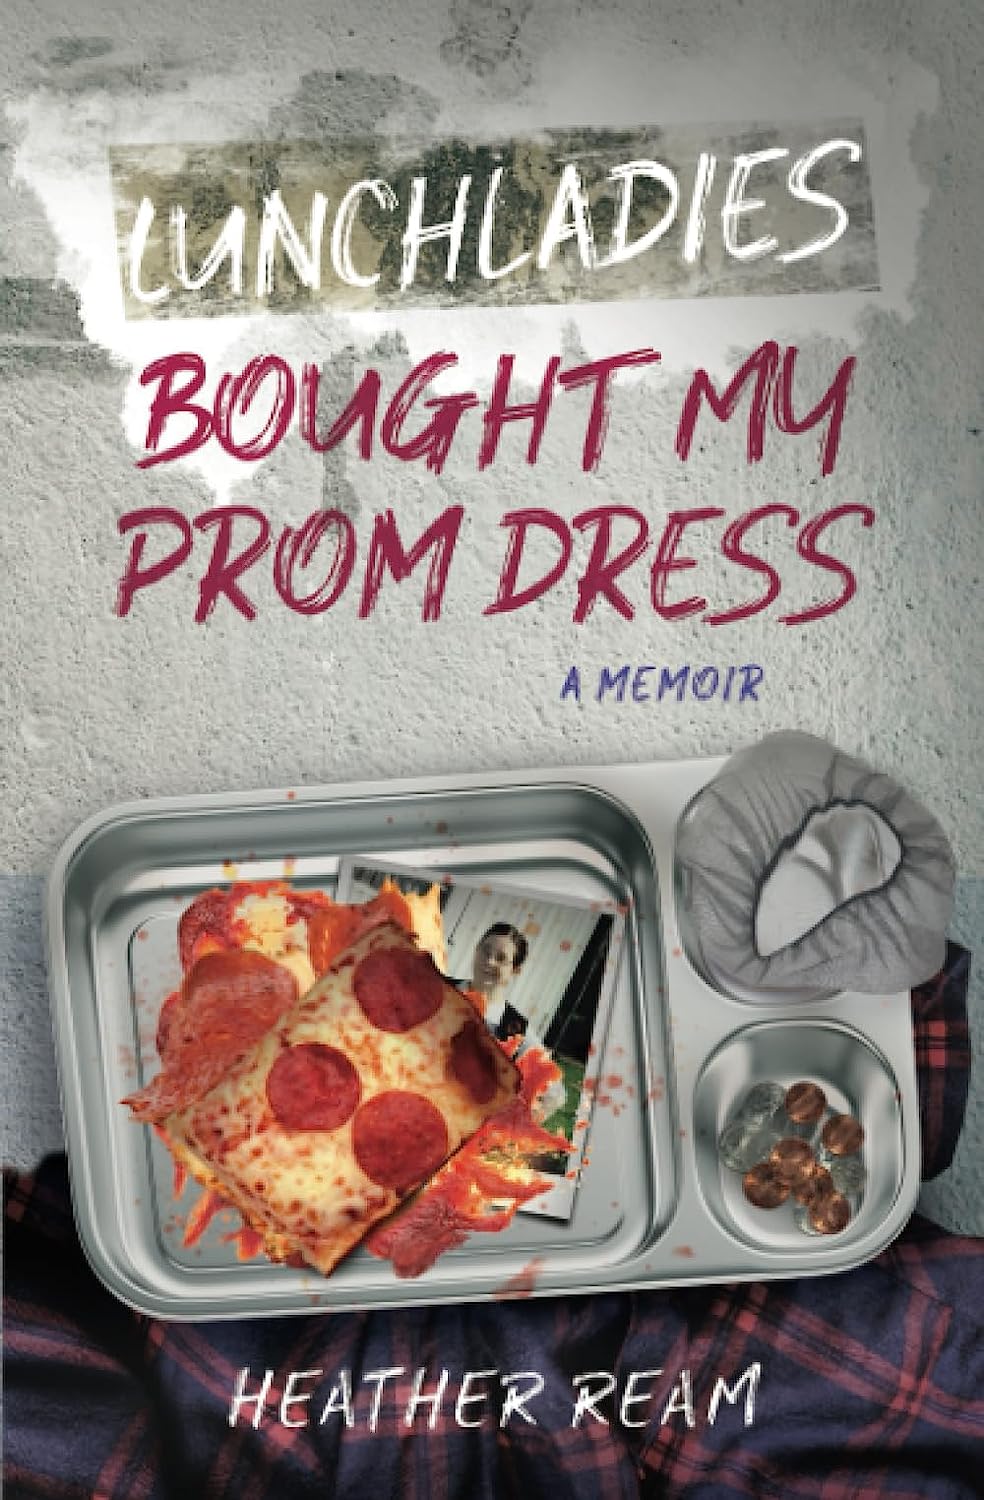 Lunchladies Bought My Prom Dress